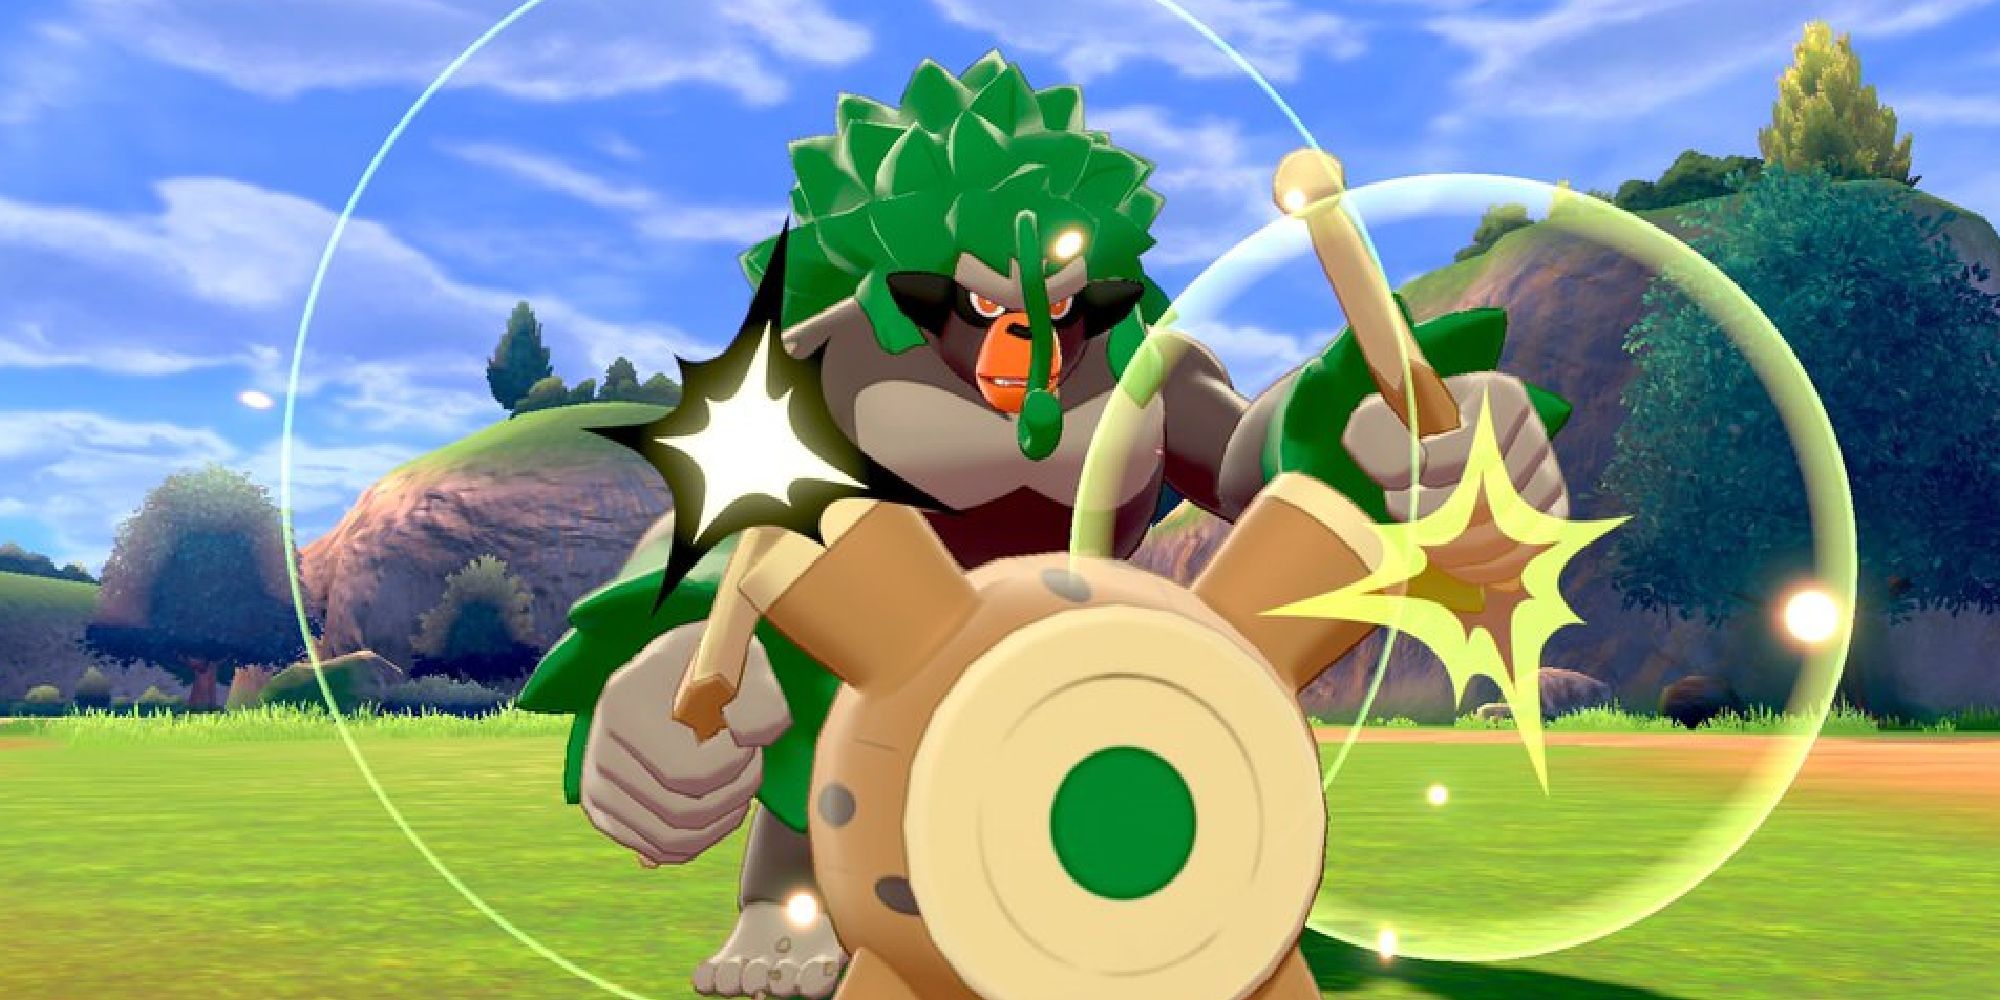 A Rillaboom pounding its drum during battle in Pokemon Sword & Shield